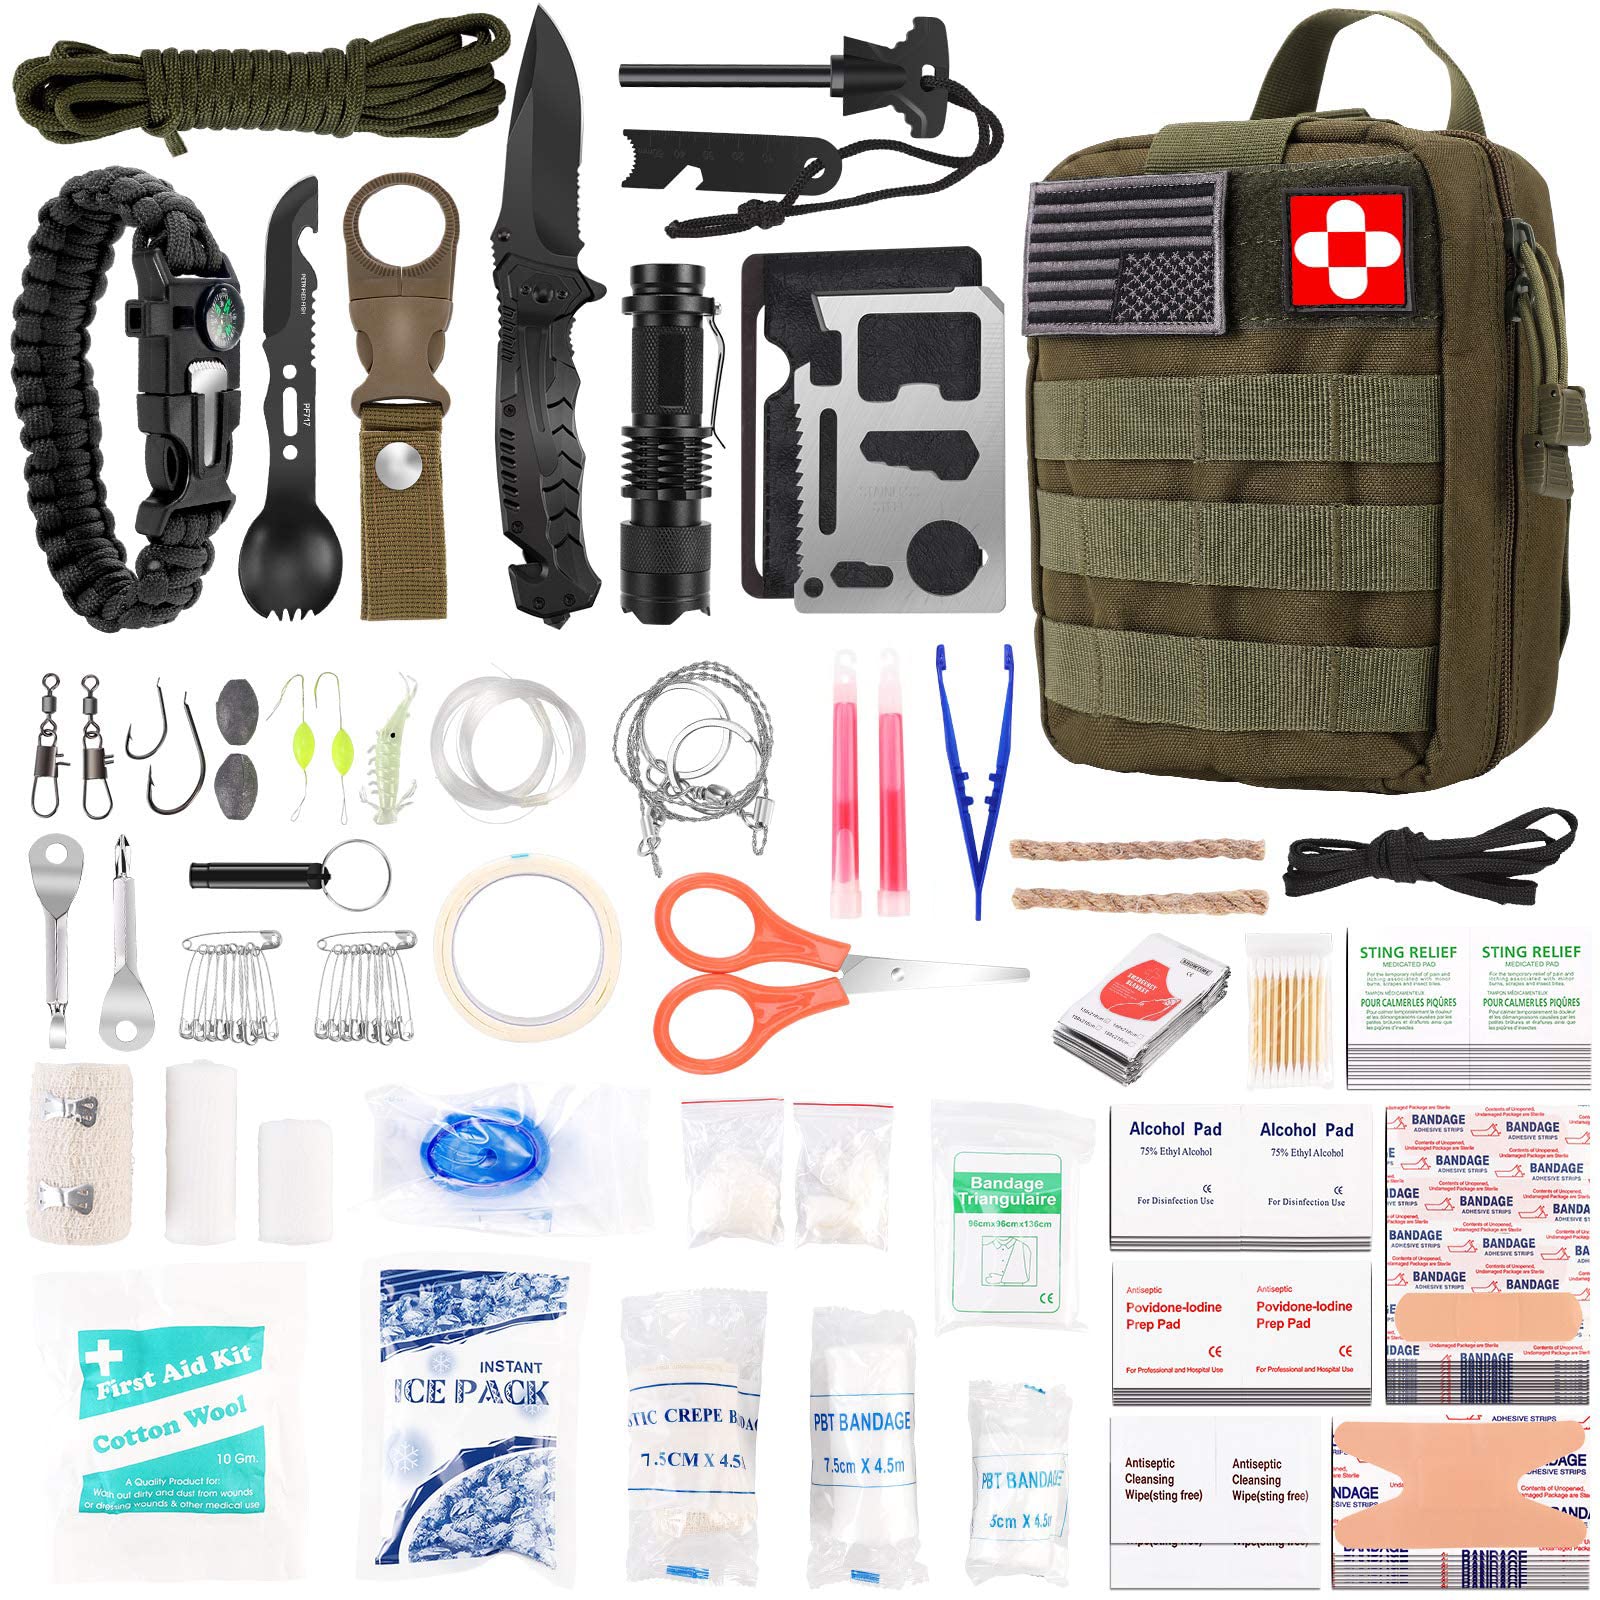 ACCESSORIES FOR CAMPING AND SURVIVAL UST 🔪 UST